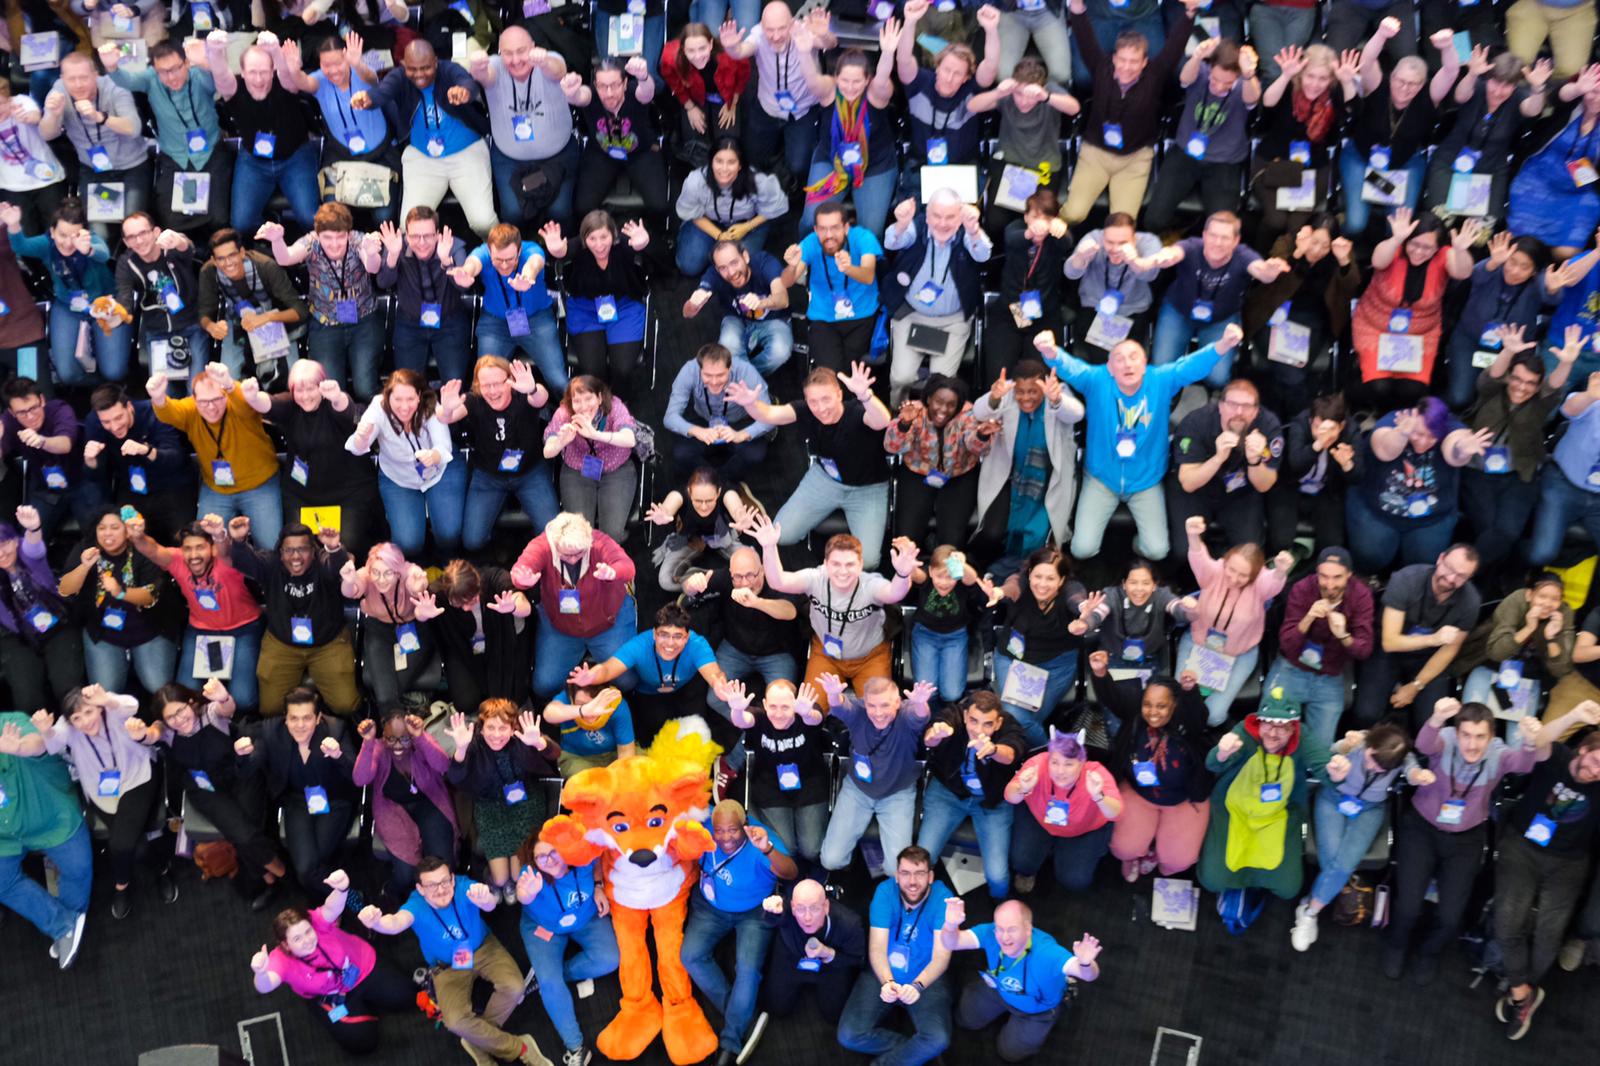 A group photo of MozFest 2019 attendees